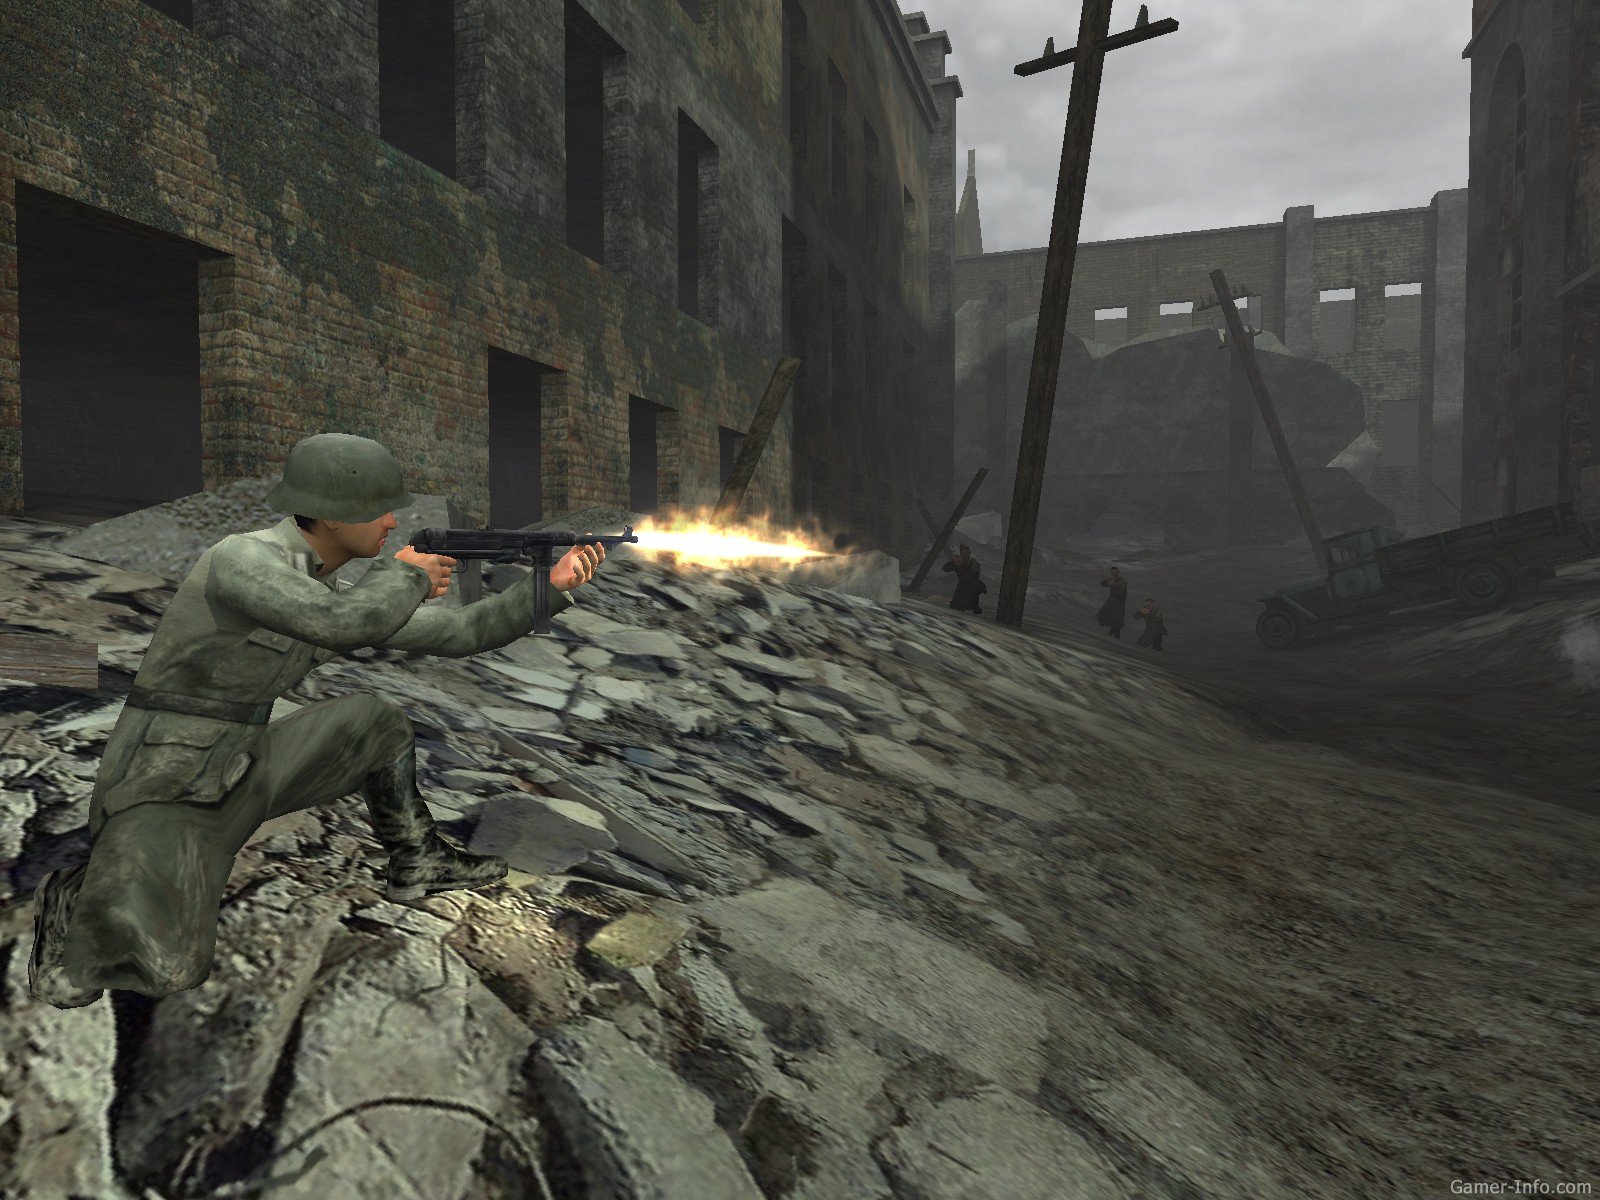 cod 2003 free download